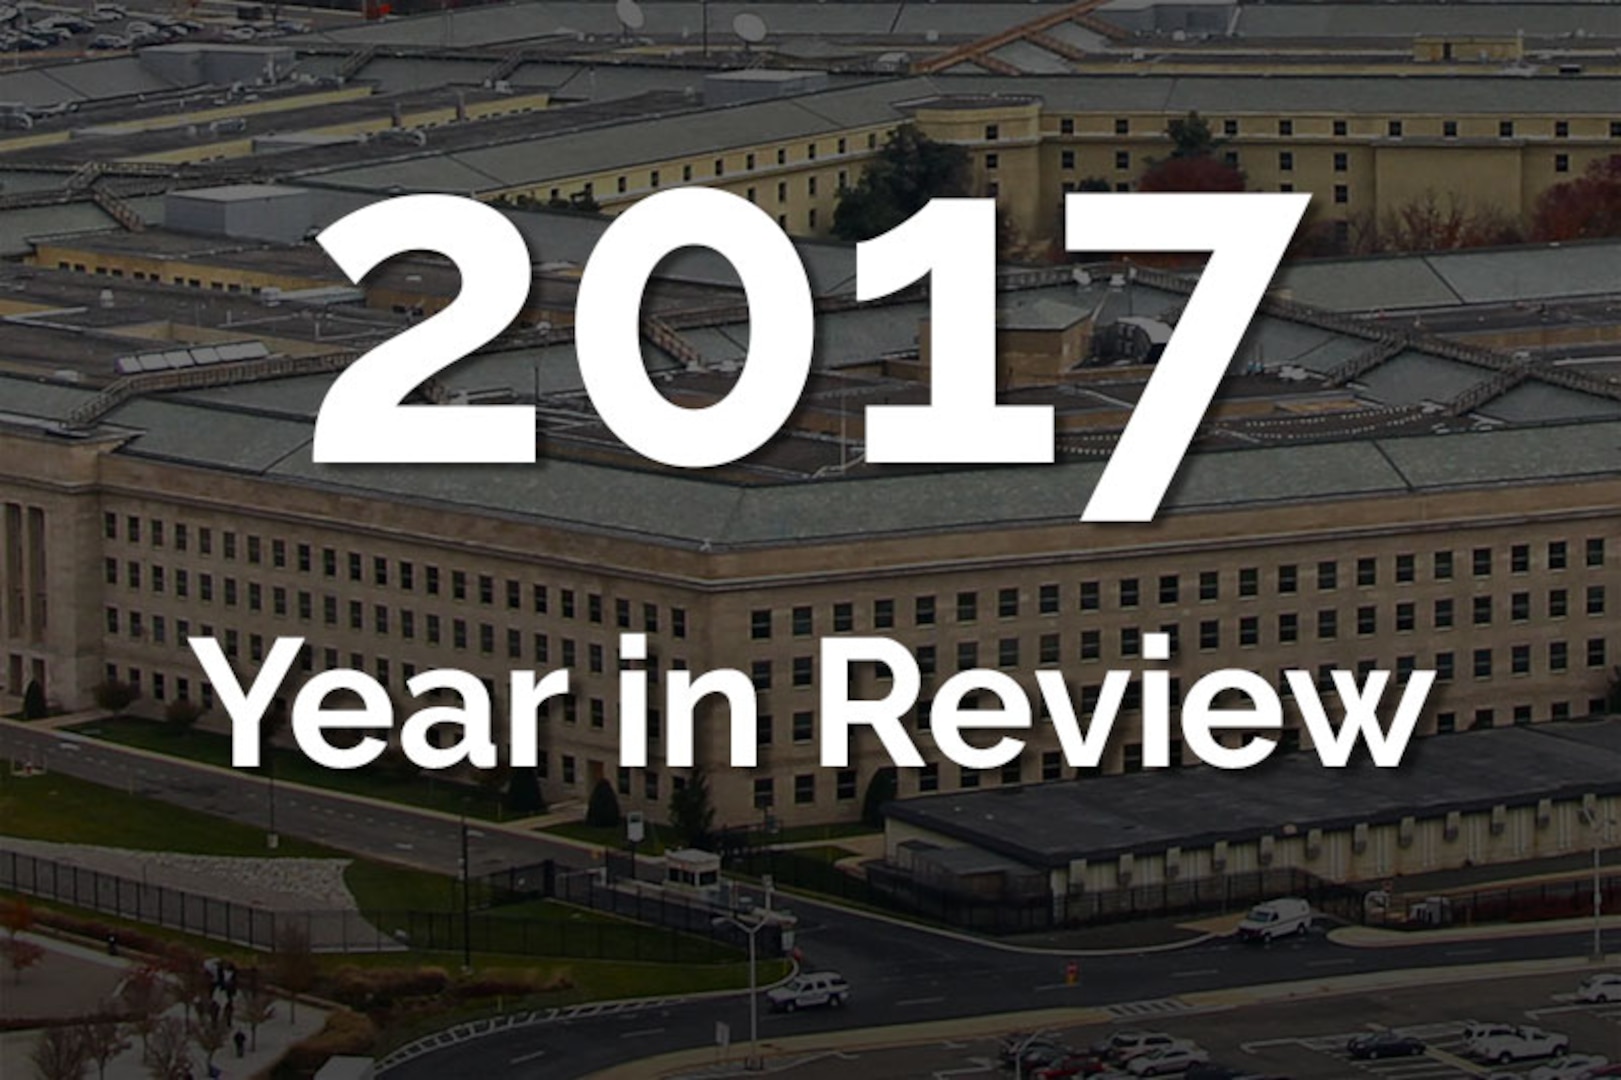 This report highlights the top Defense Department priorities in 2017, from maintaining a safe nuclear deterrent and strengthening alliances to keeping faith with military families.